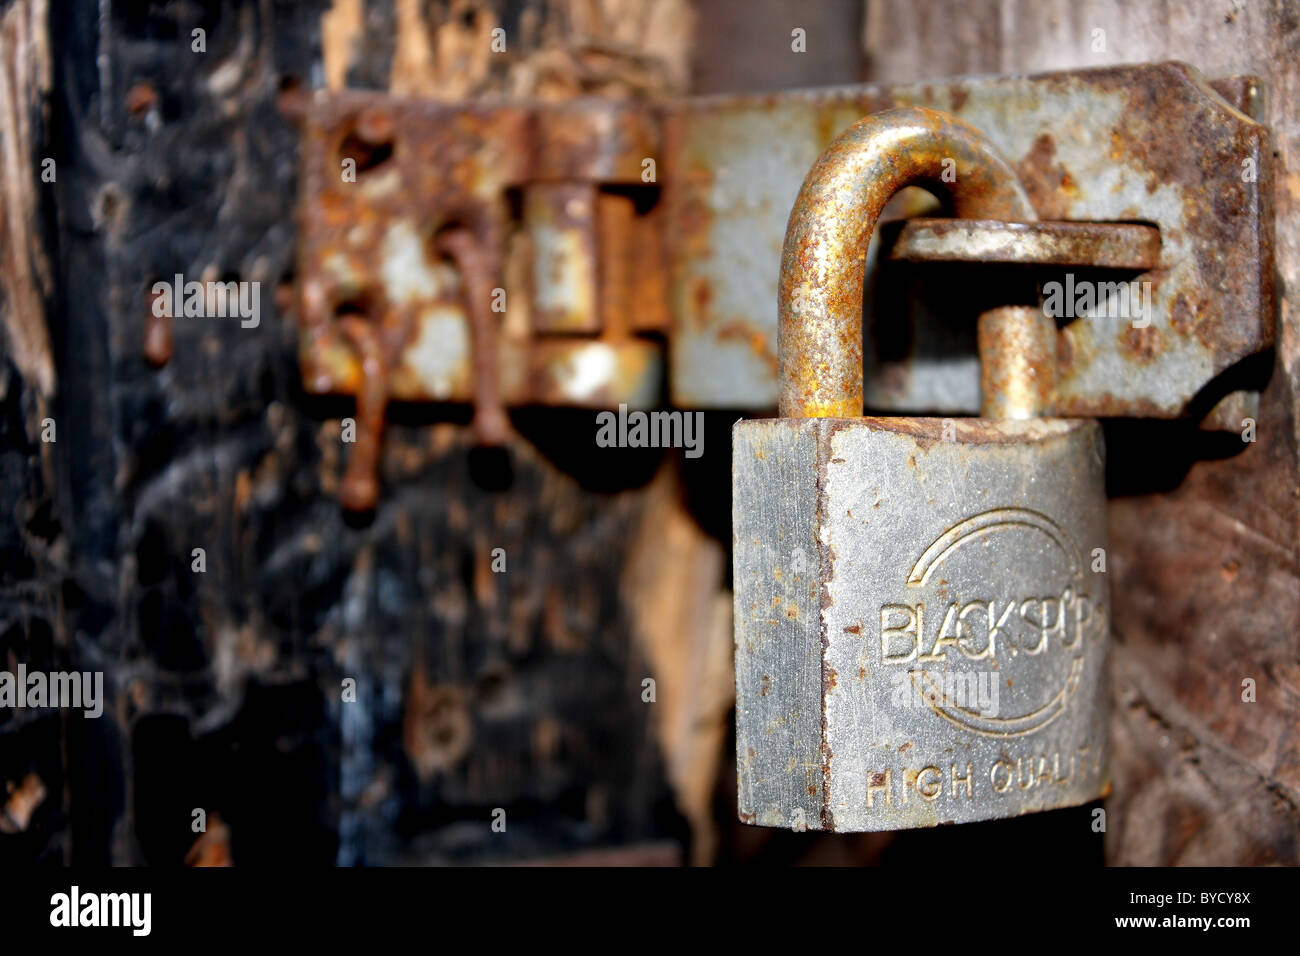 A padlock by Blackspur on an old wooden door held in by nails Stock Photo